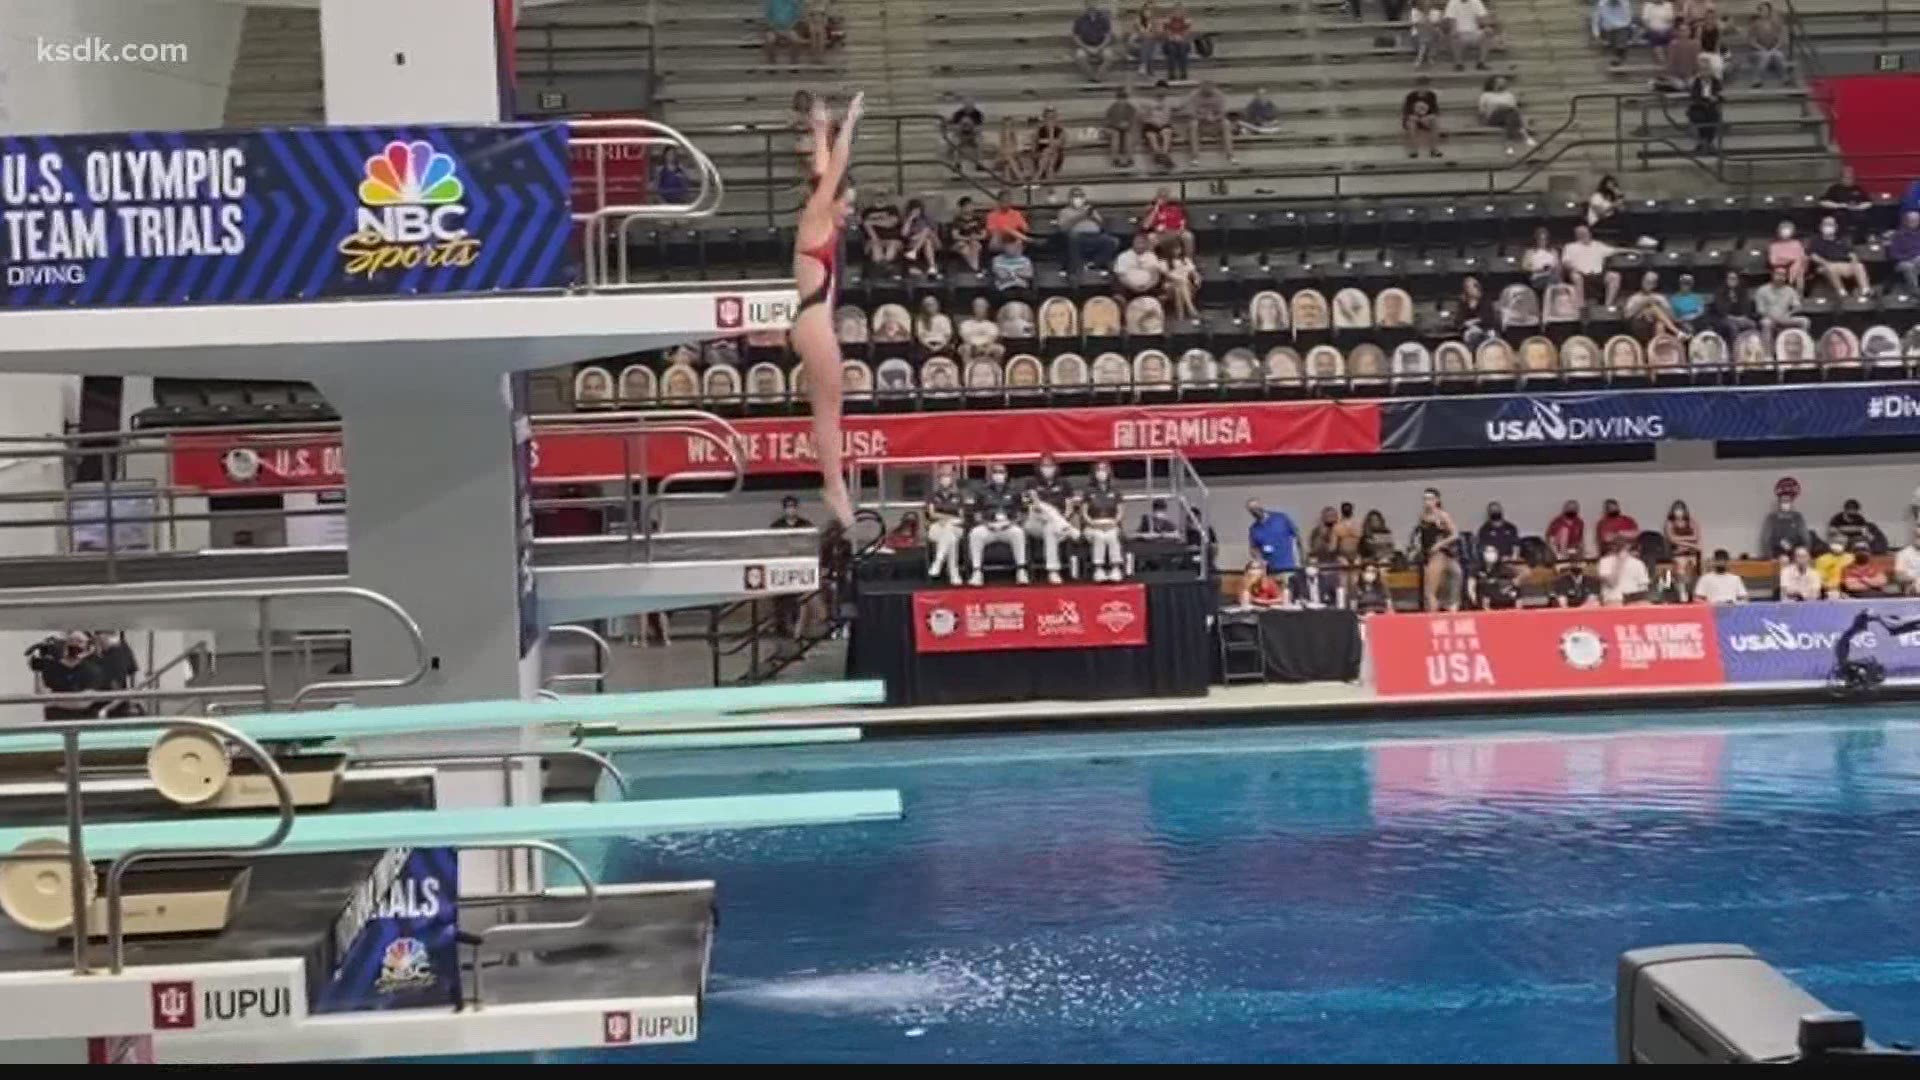 The former Westminster diver is close to earning a spot on the Olympic team.